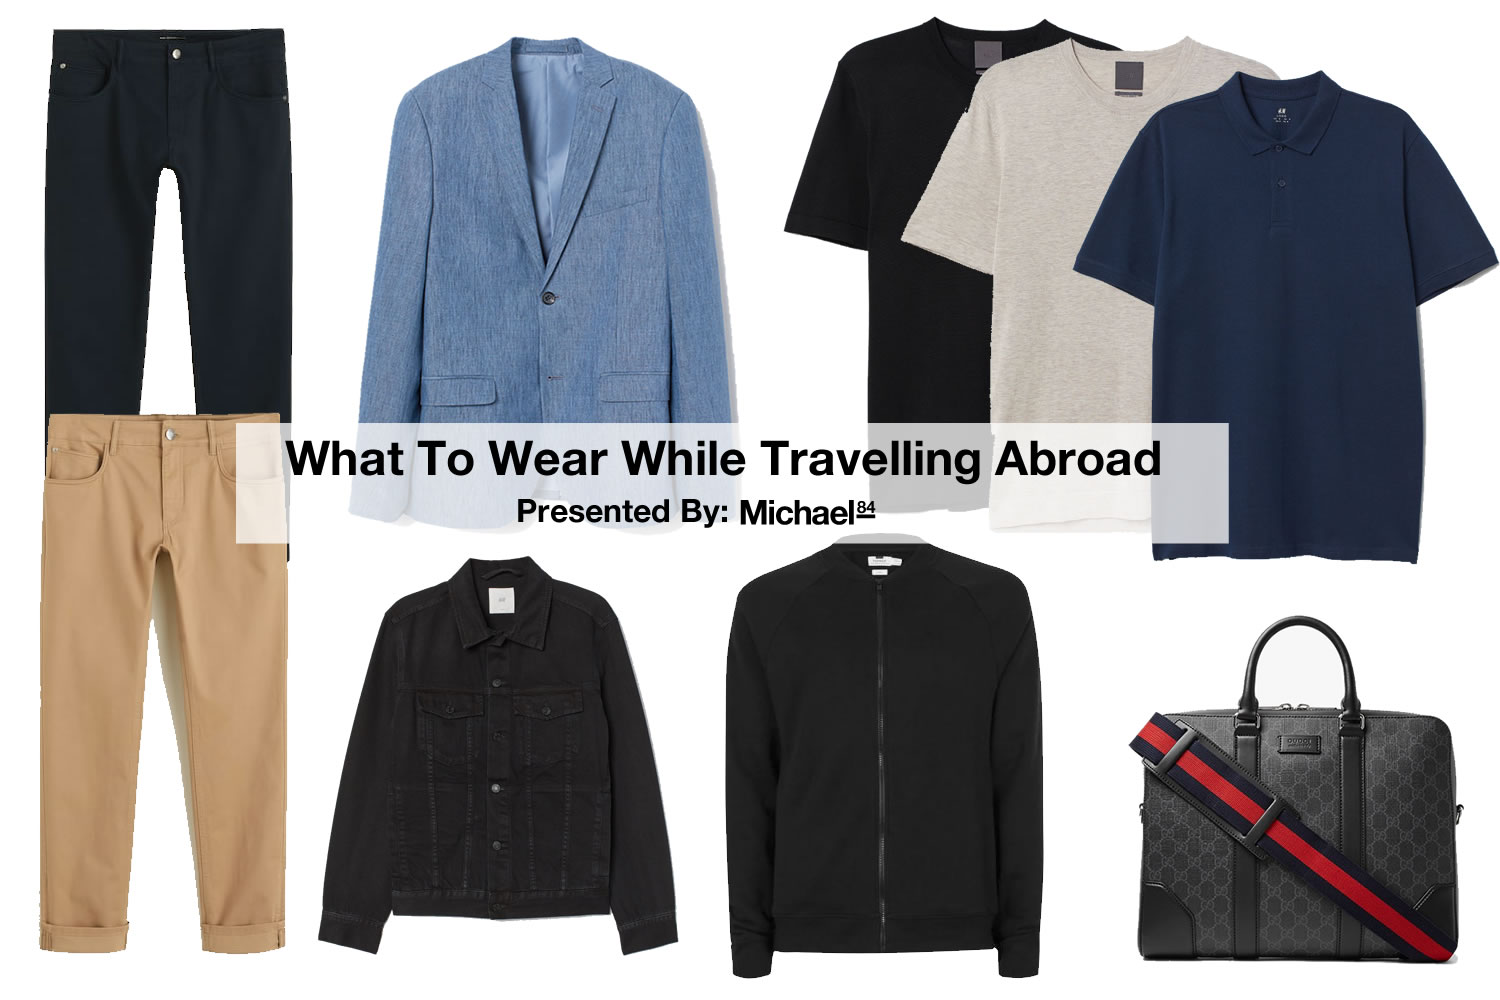 The Best Outfits When Travelling: Here's How To Look Stylish At The Airport  When You're Travelling Abroad